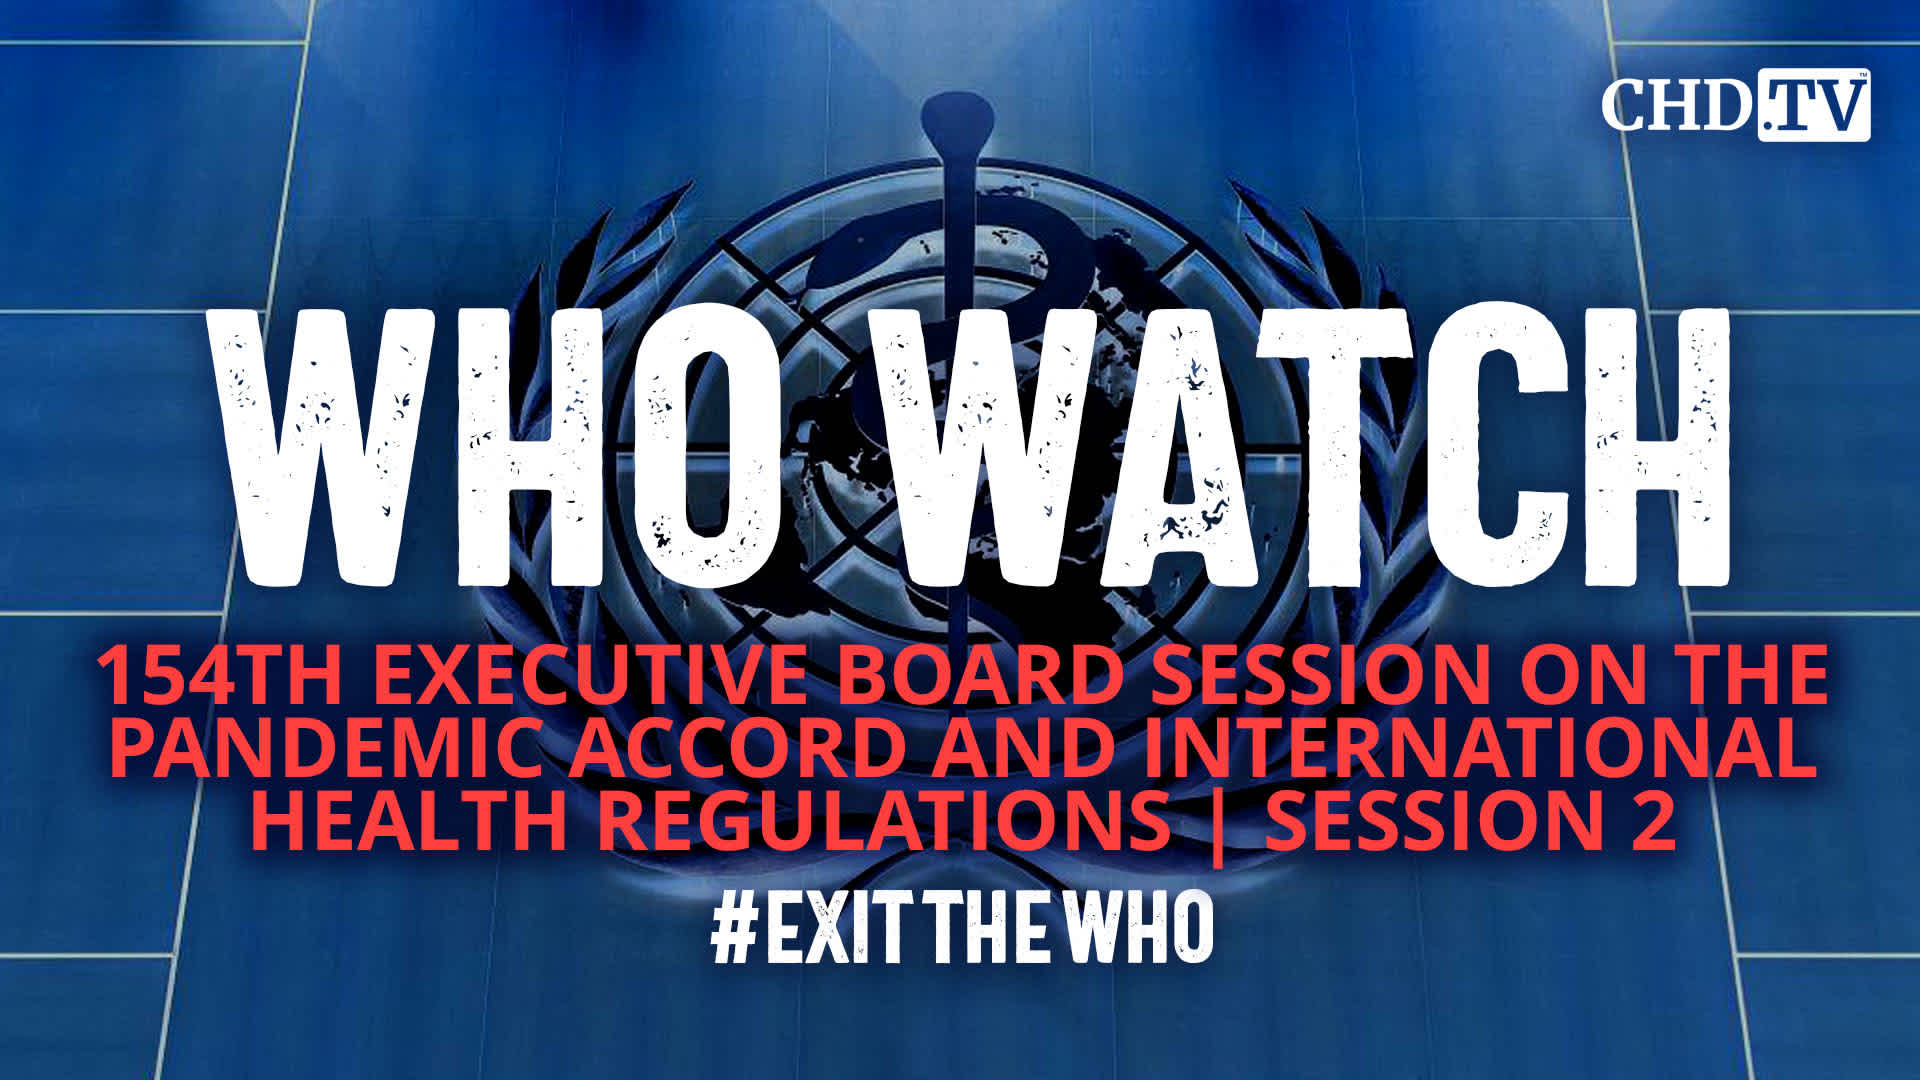 WHO WATCH: 154th Executive Board Session on the Pandemic Accord and International Health Regulations | Session 2